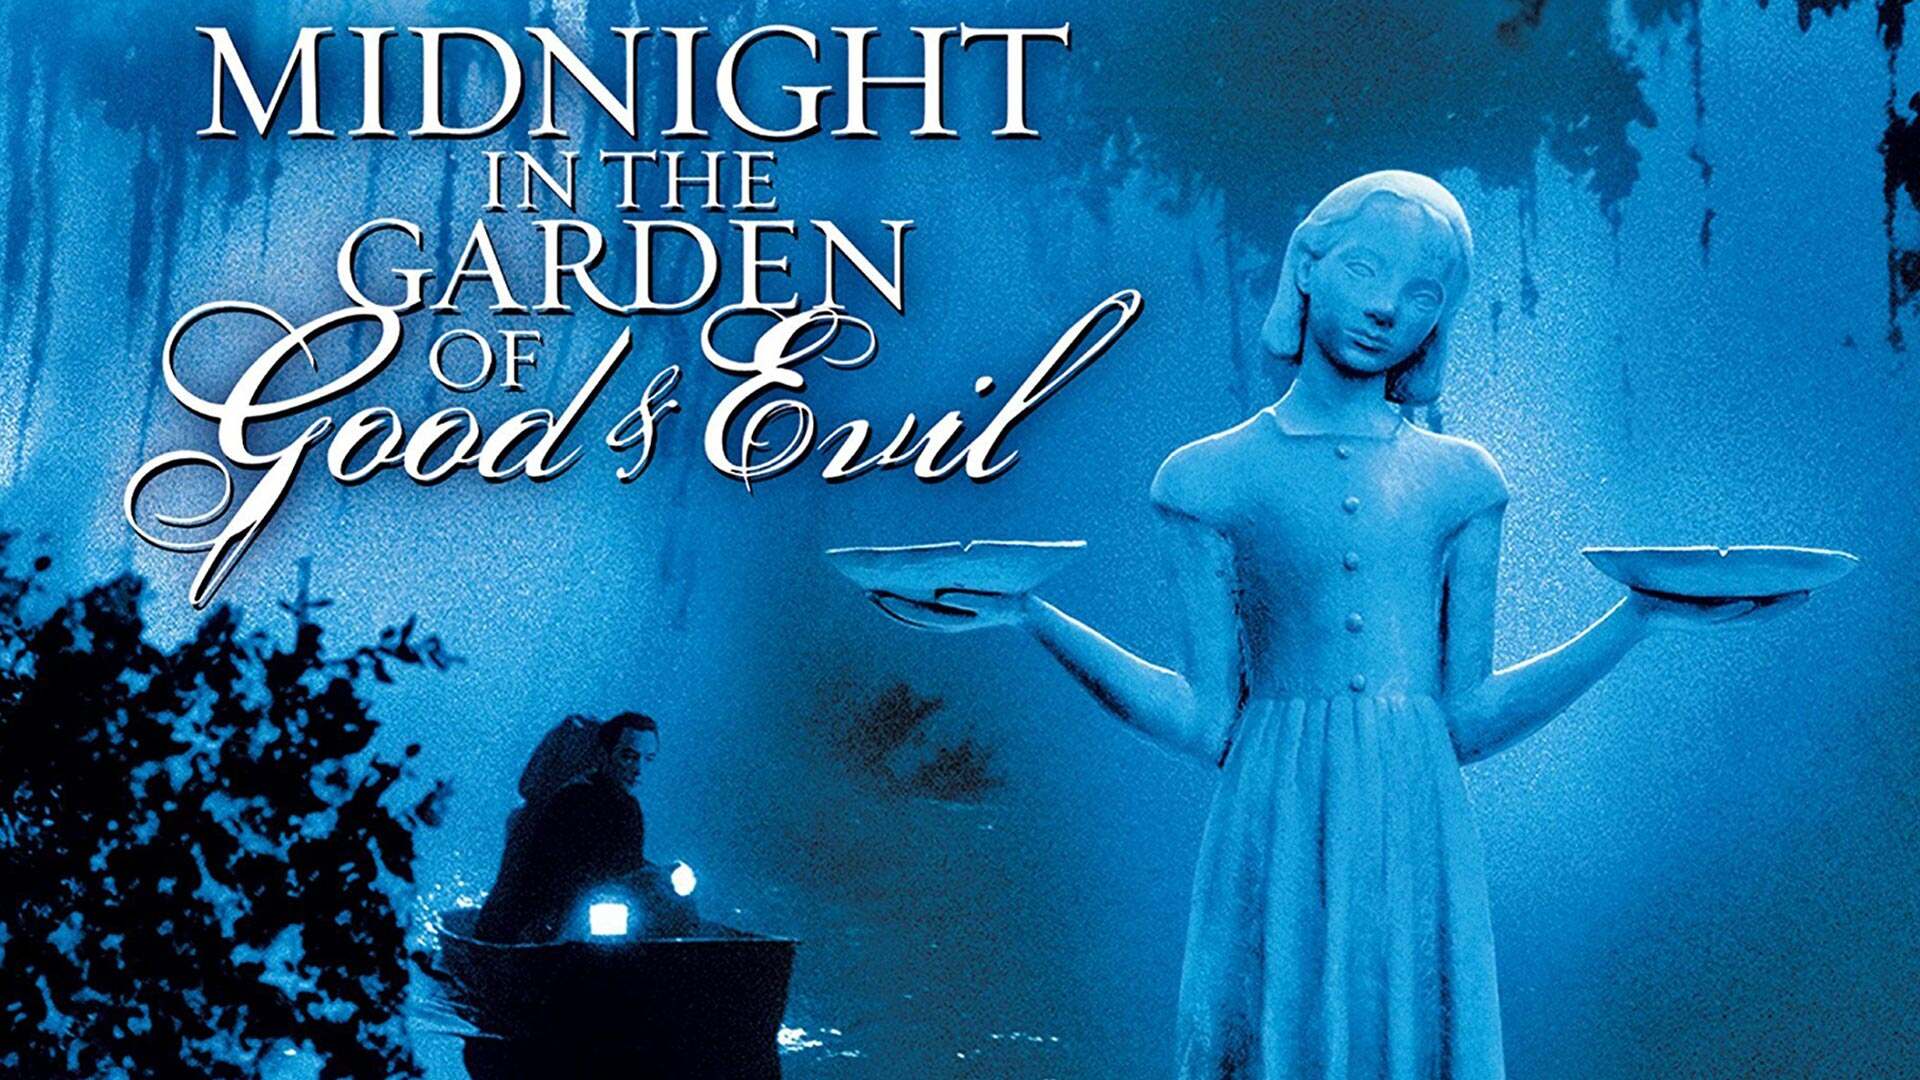 36-facts-about-the-movie-midnight-in-the-garden-of-good-and-evil